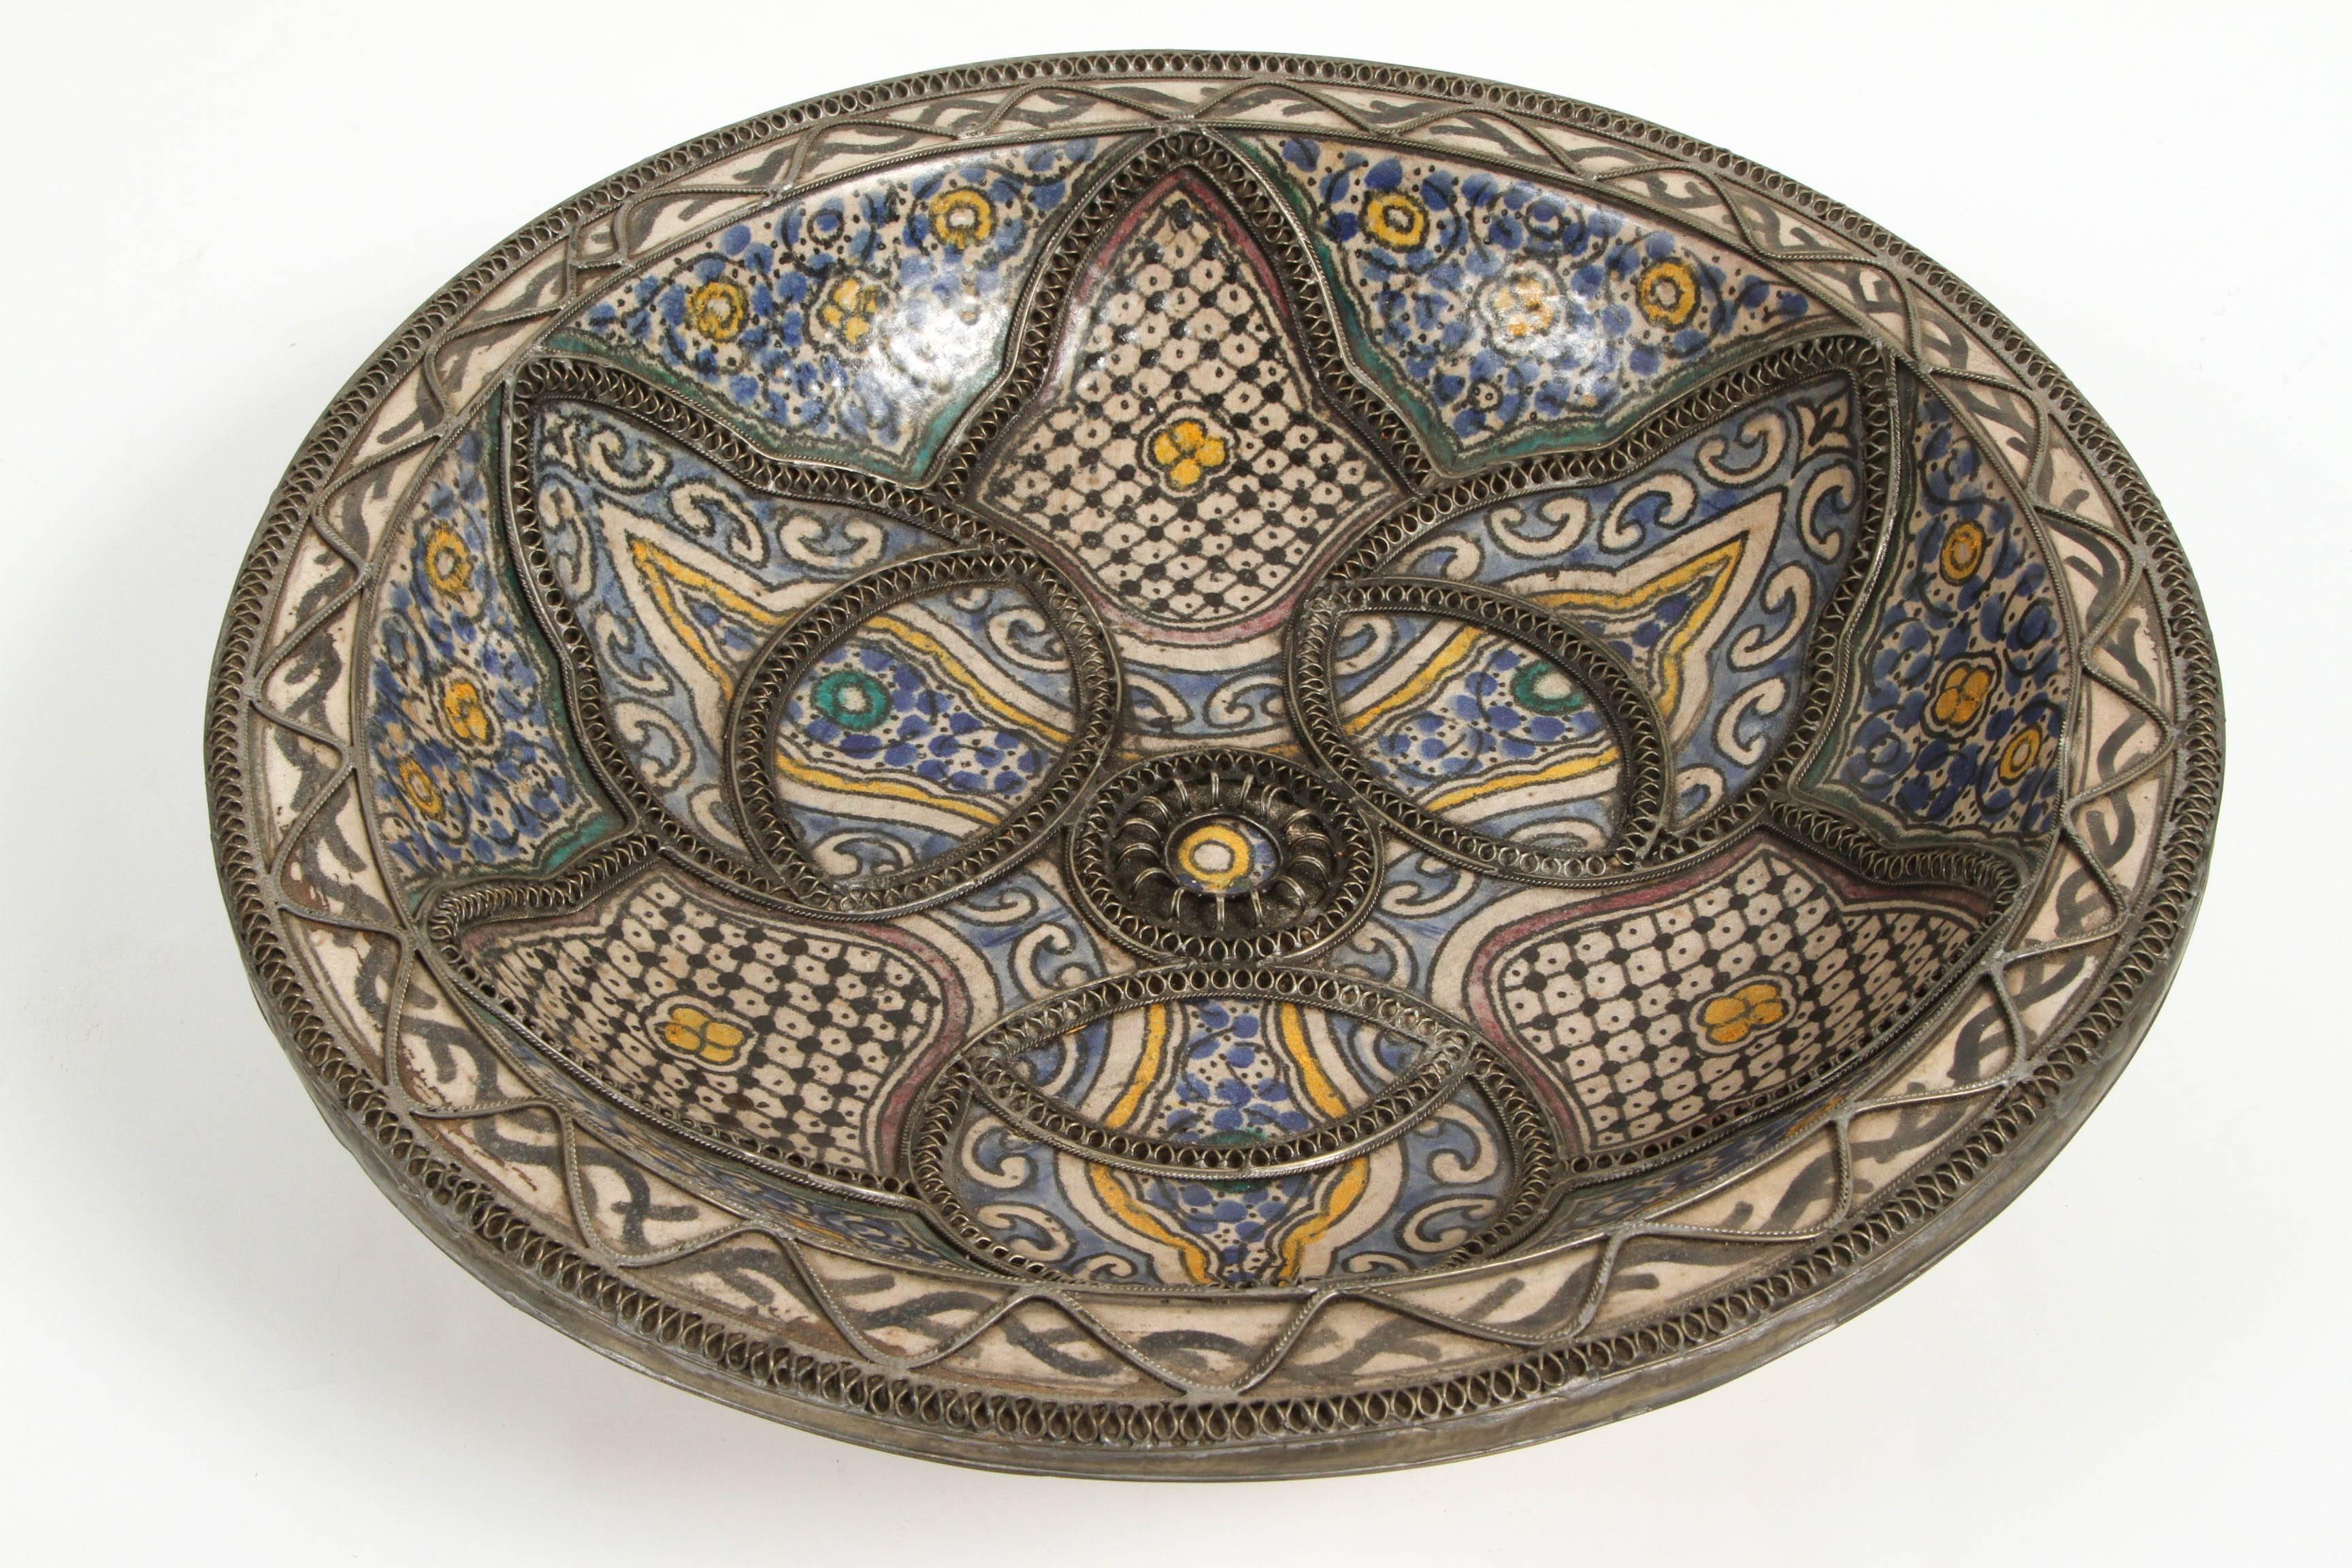 Moroccan Large Decorative Ceramic Plates from Fez